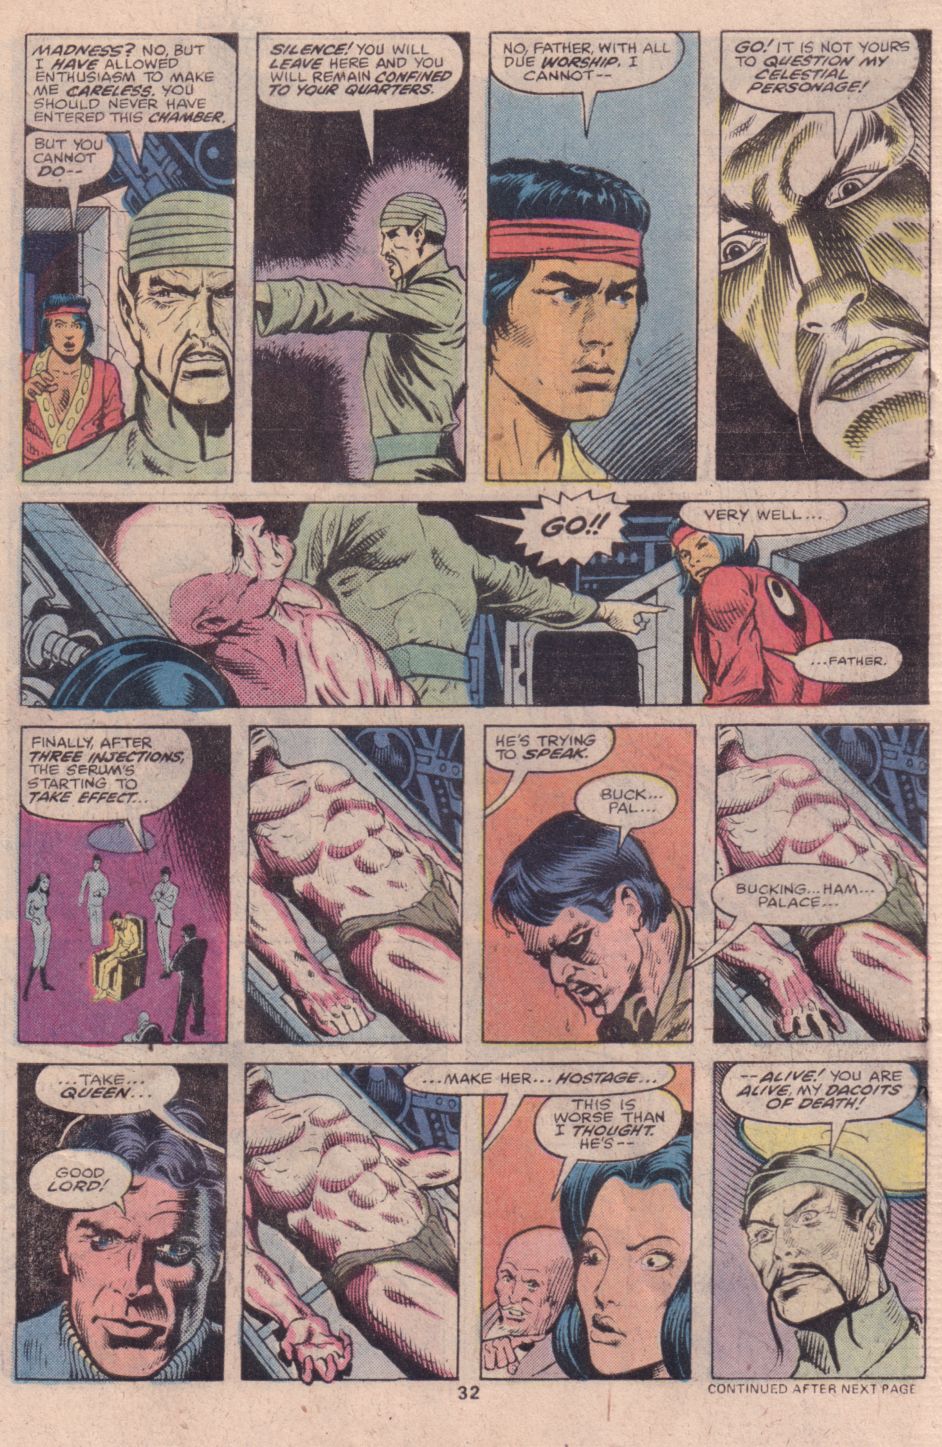 What If? (1977) Issue #16 - Shang Chi Master of Kung Fu fought on The side of Fu Manchu #16 - English 25